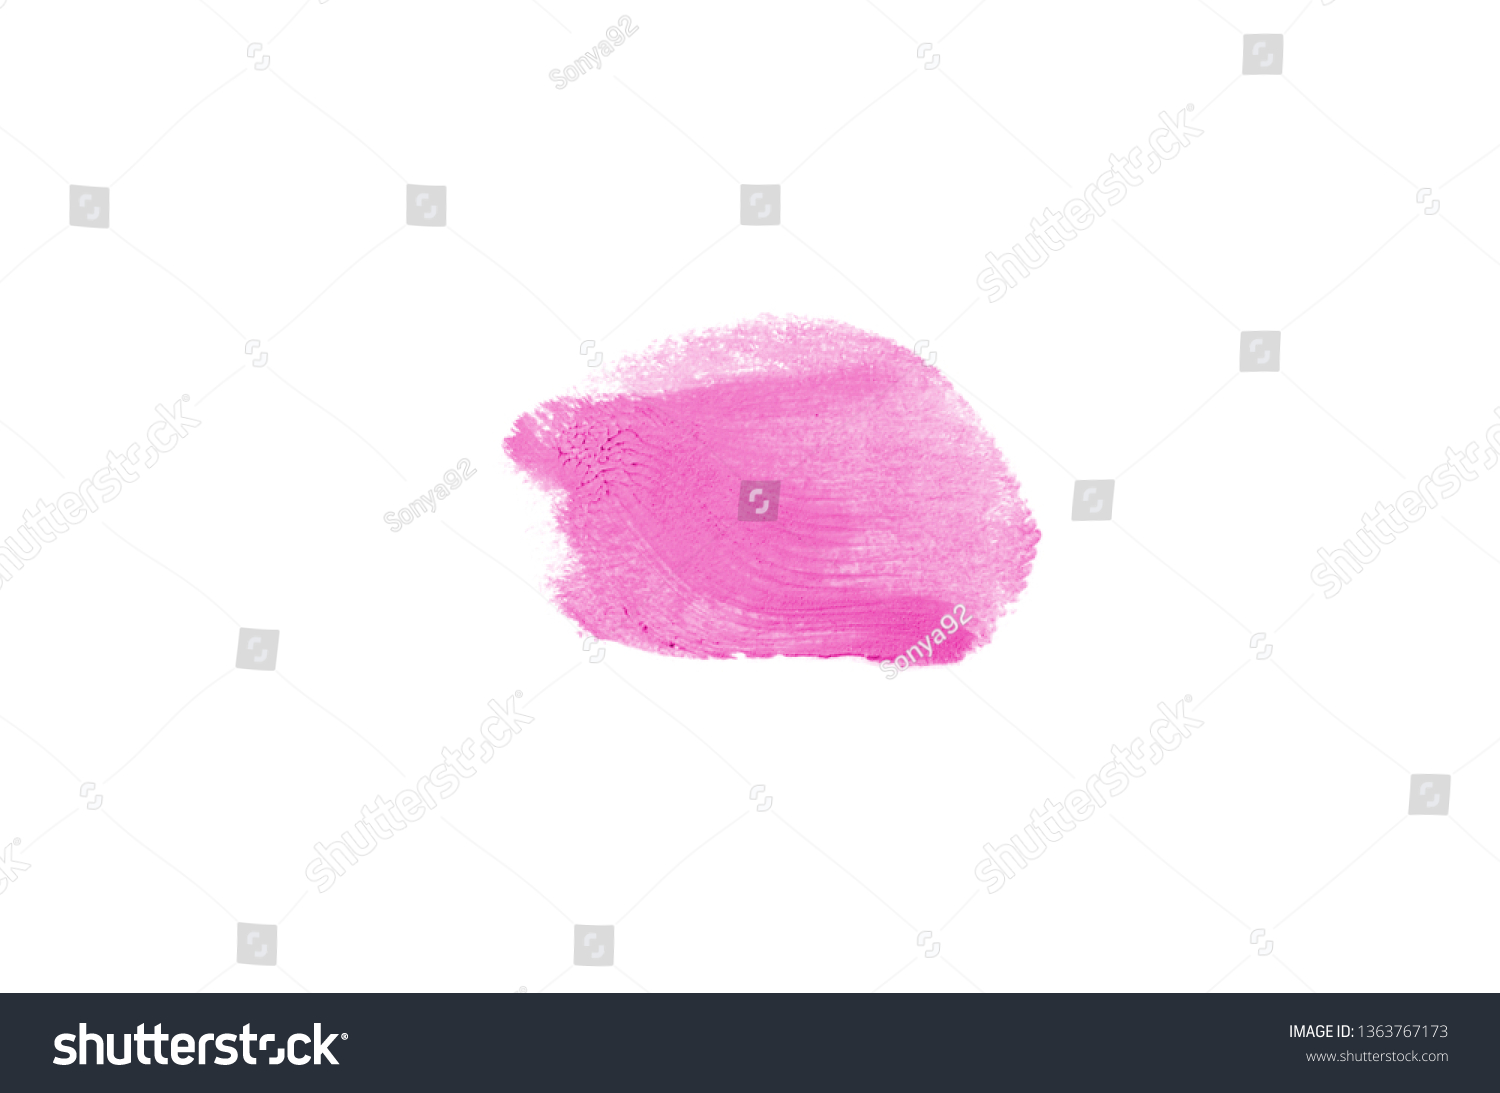 Smear and texture of lipstick or acrylic paint isolated on white background. Stroke of lipgloss or liquid nail polish swatch smudge sample. Element for beauty cosmetic design. Pink color #1363767173